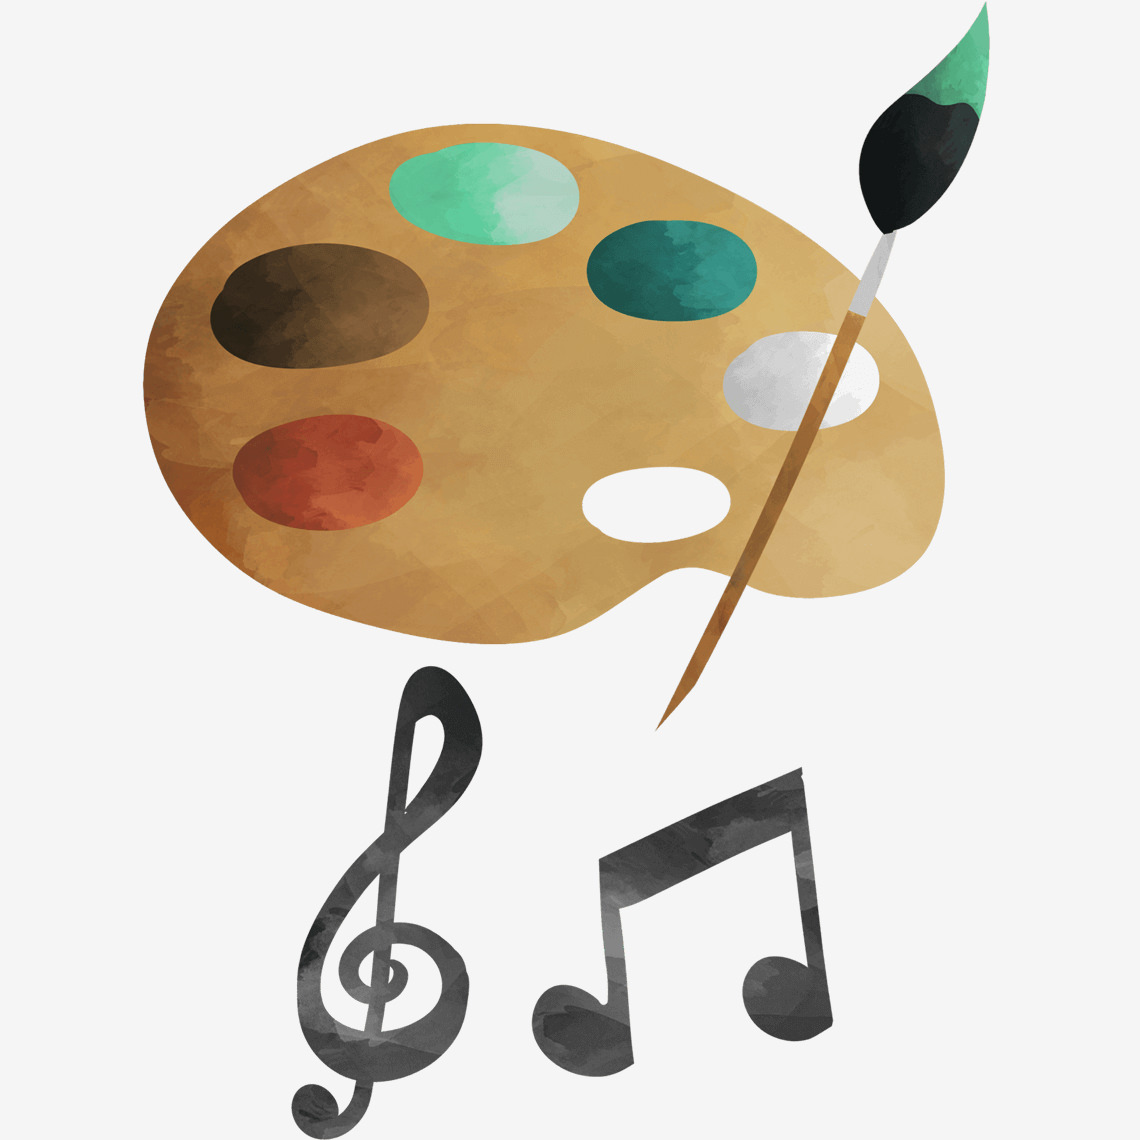 Palette and musical notes illustration